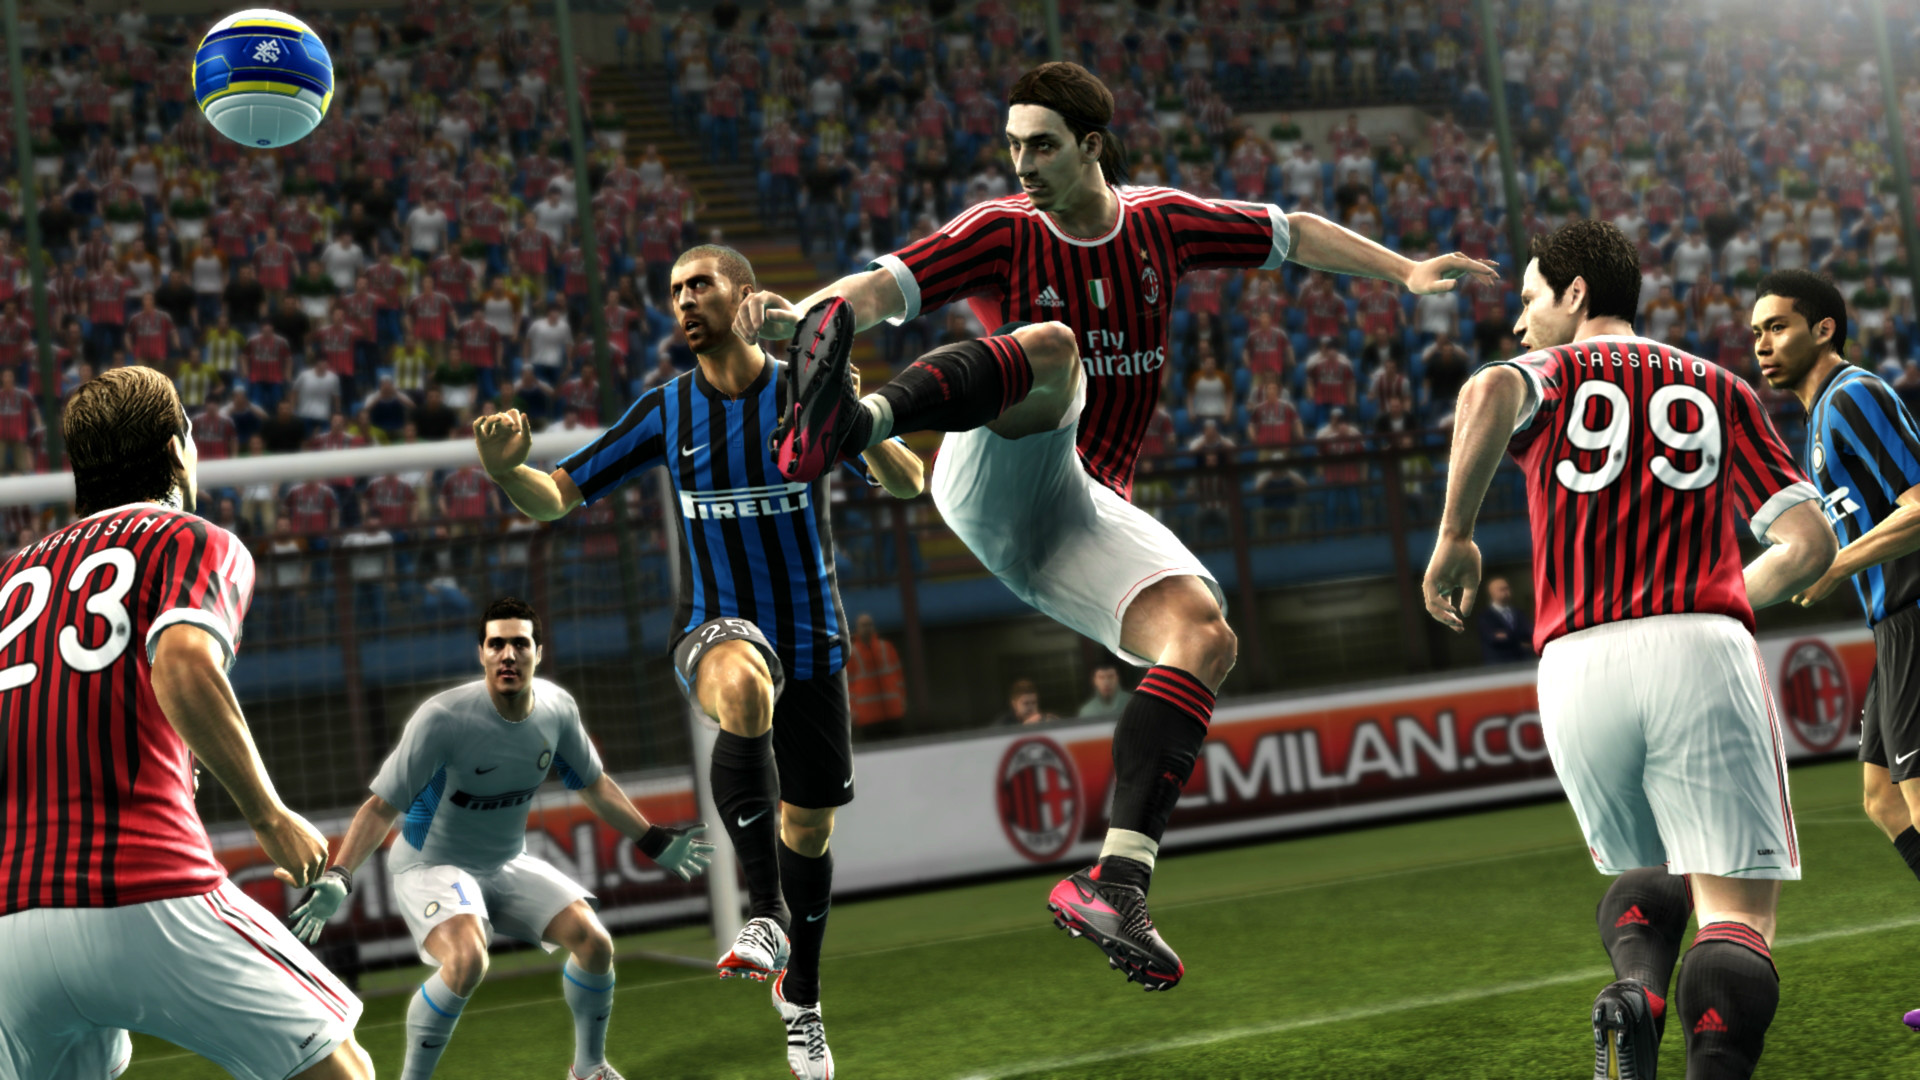 pes 2013 free download for pc full version with crack